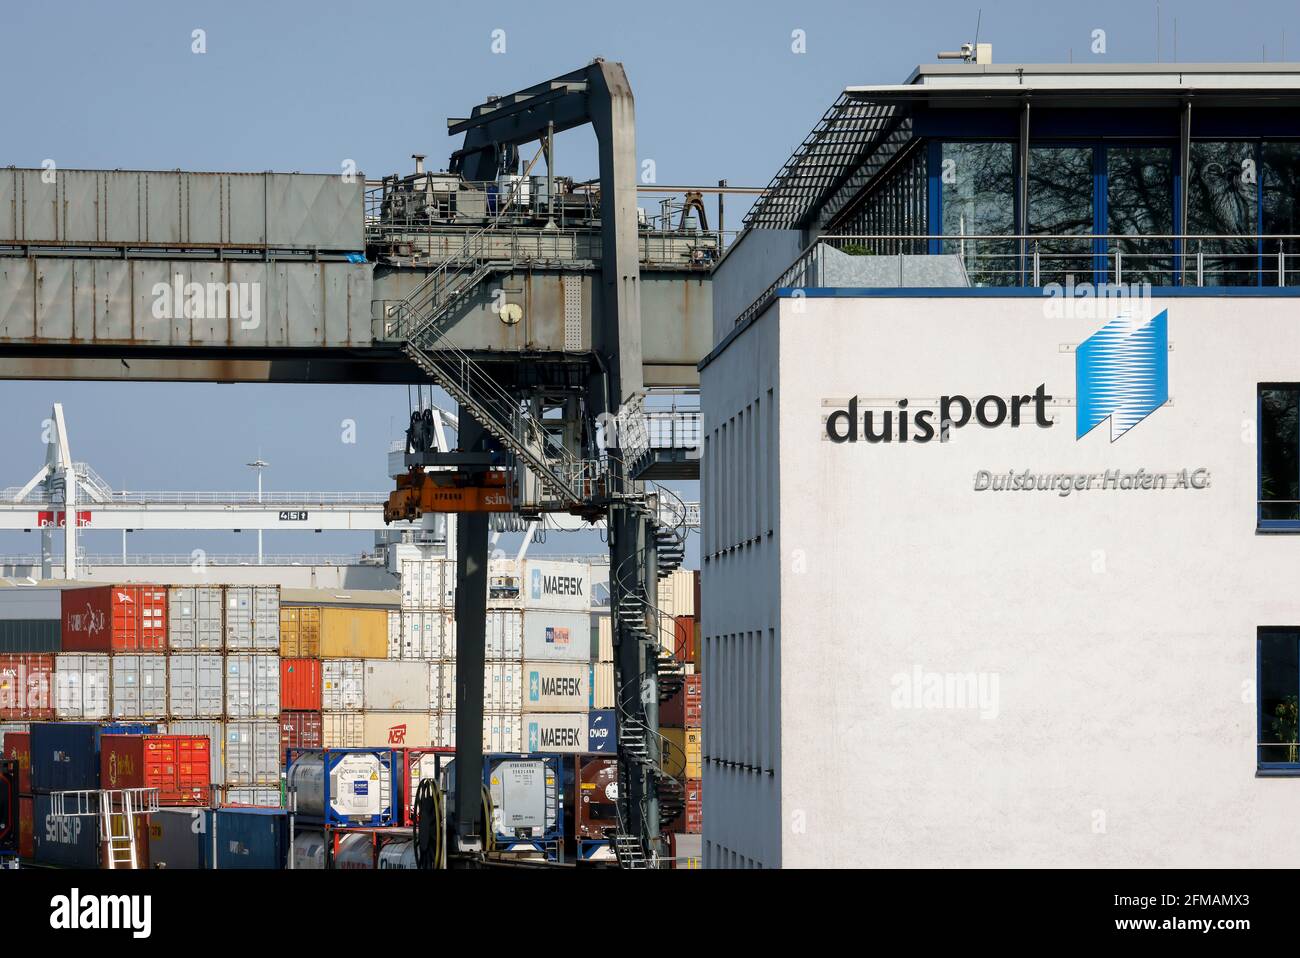 Duisburg, Ruhr area, North Rhine-Westphalia, Germany - Duisburger Hafen AG, Duisport, company headquarters at the container terminal in the Duisburg Ruhrort district. Stock Photo